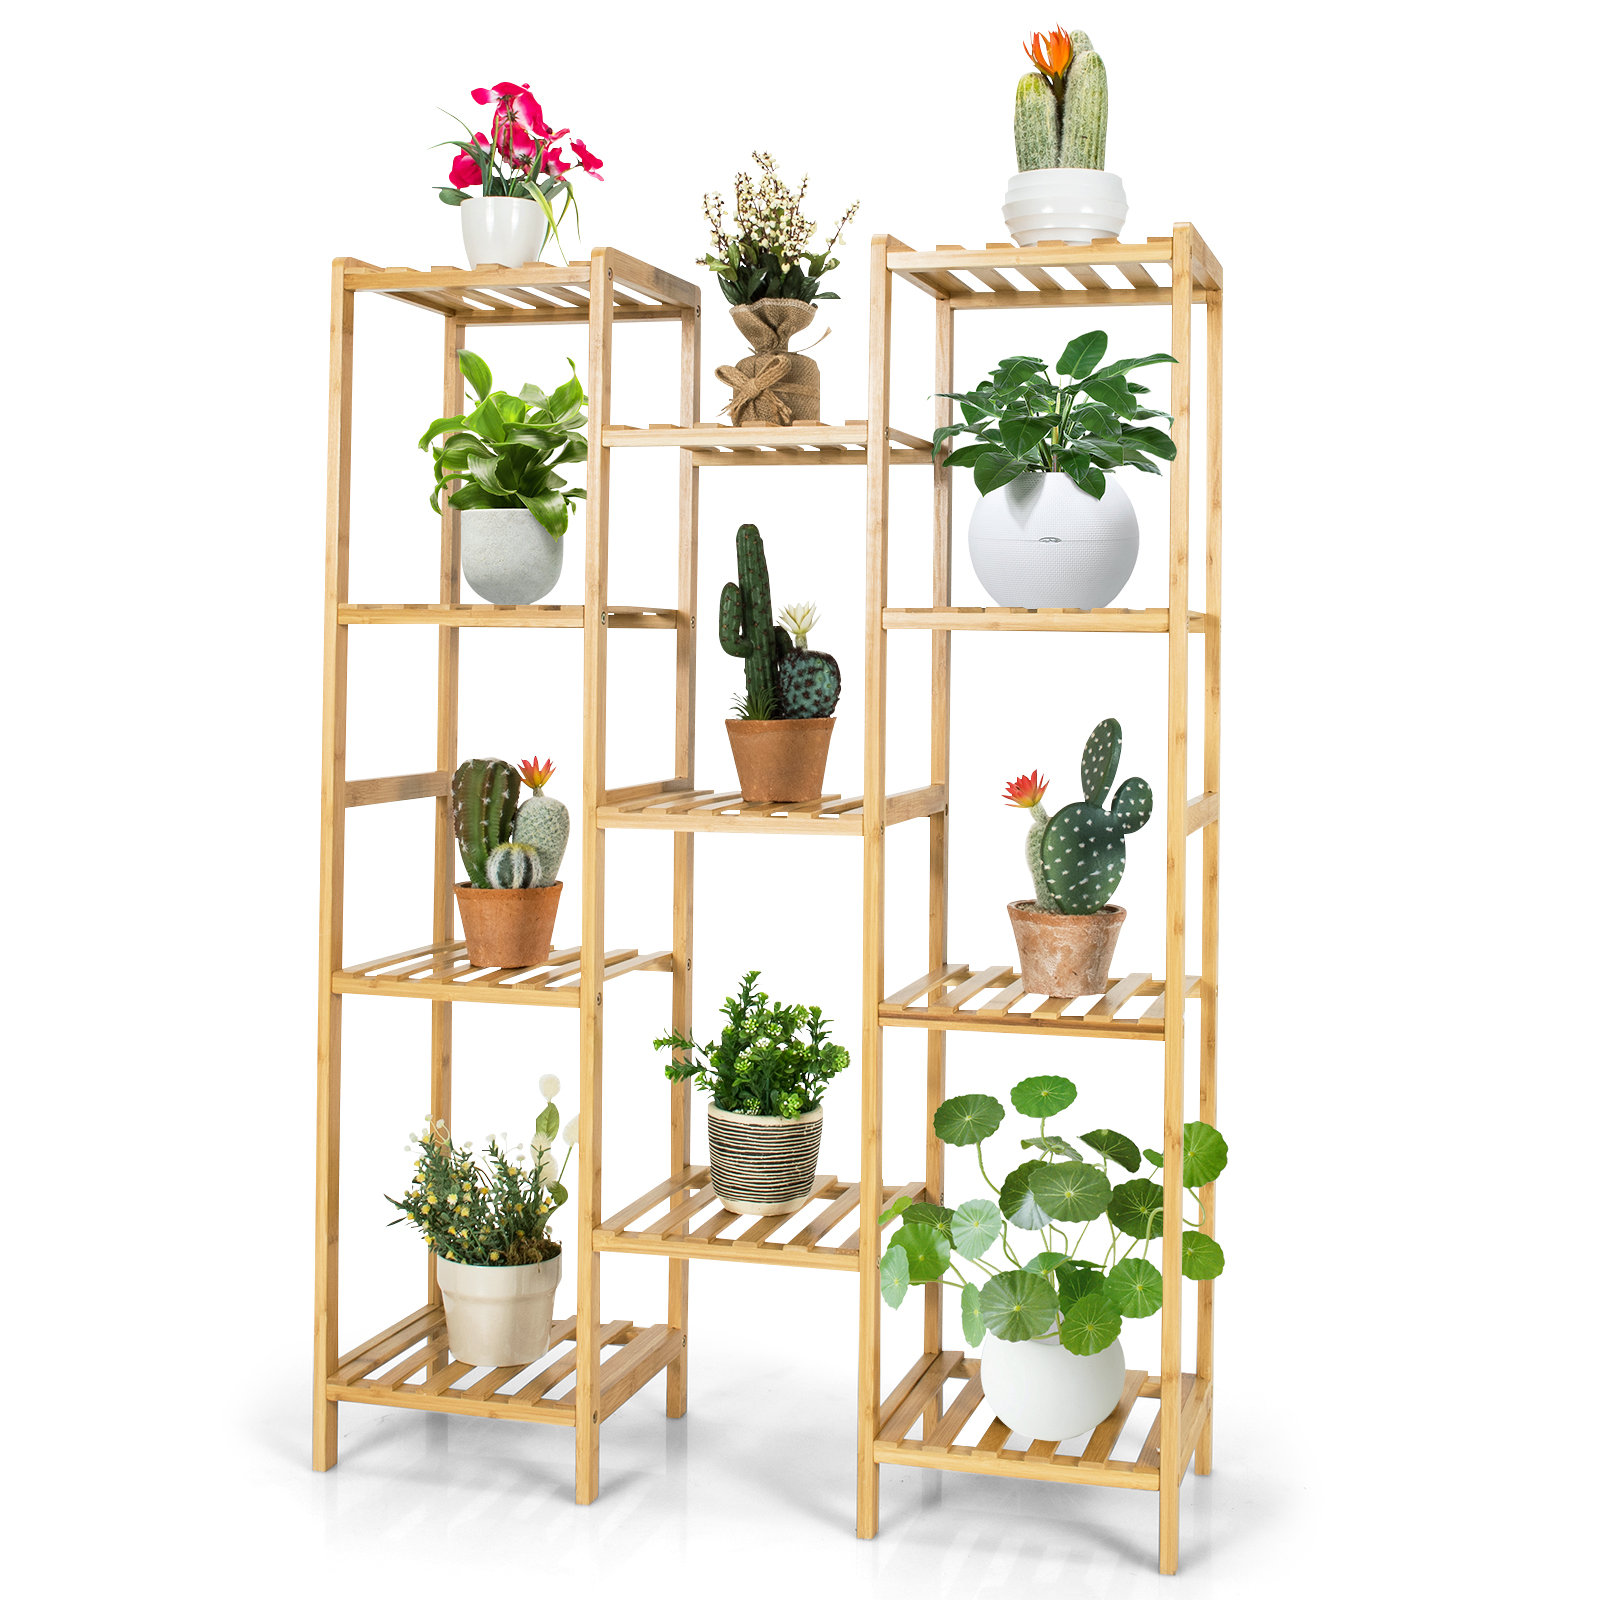 Arlmont & Co. Haliegh Plant Stand